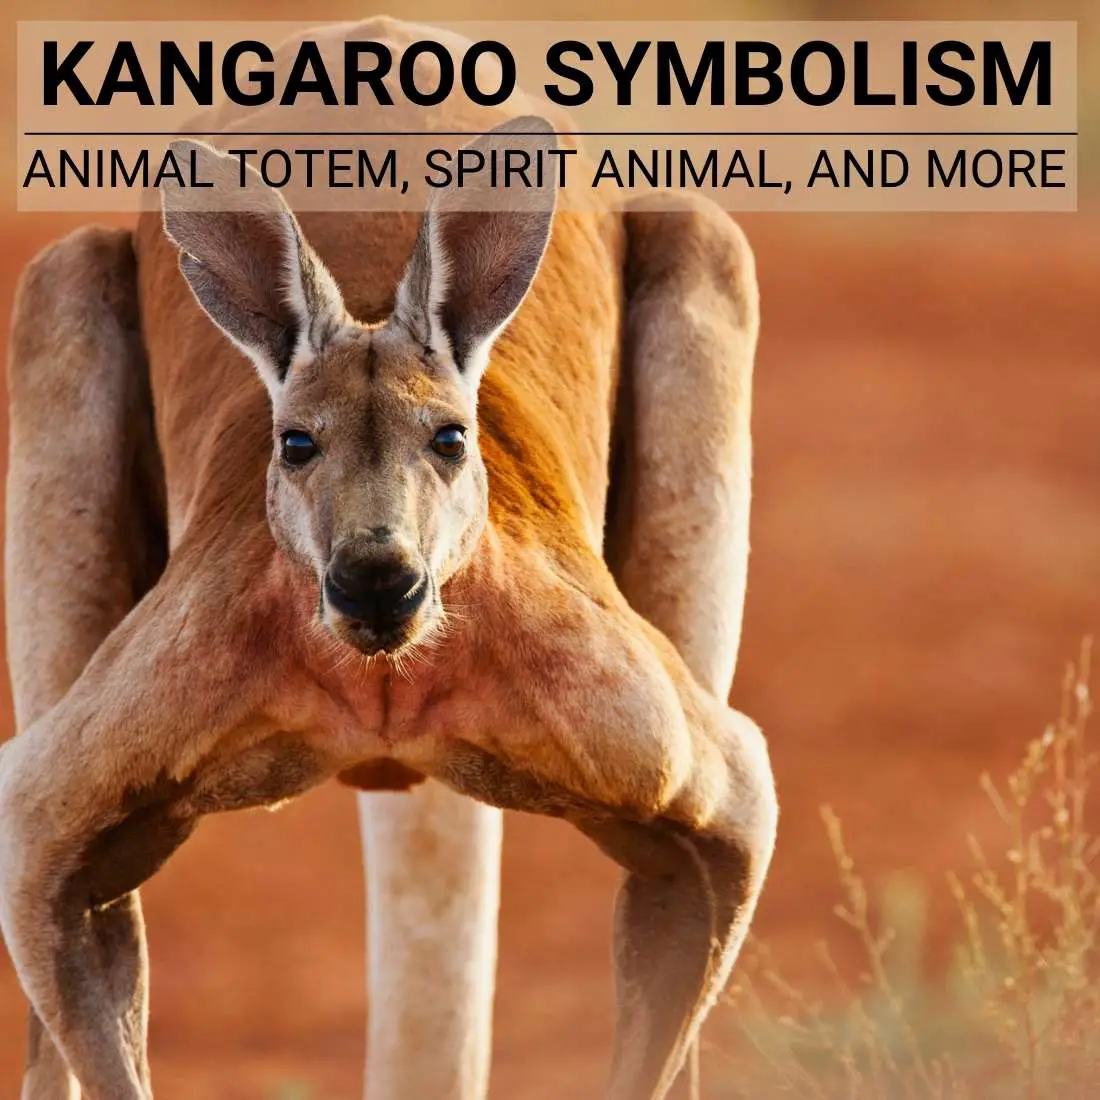 What Is The Cultural Significance Of Kangaroo Dreams?